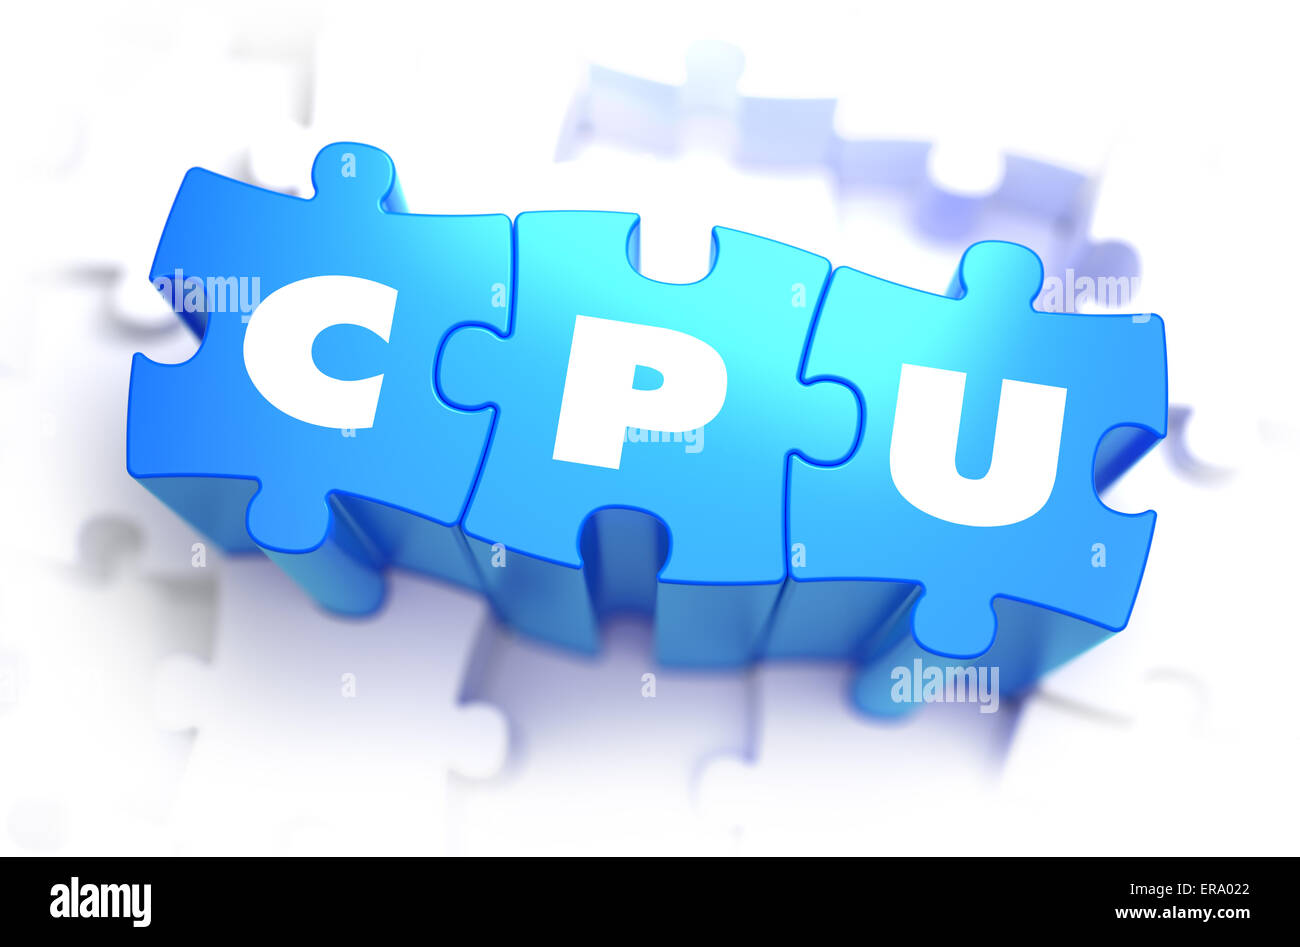 CPU - Central Processing Unit - White Word on Blue Puzzles on White  Background. 3D Render Stock Photo - Alamy